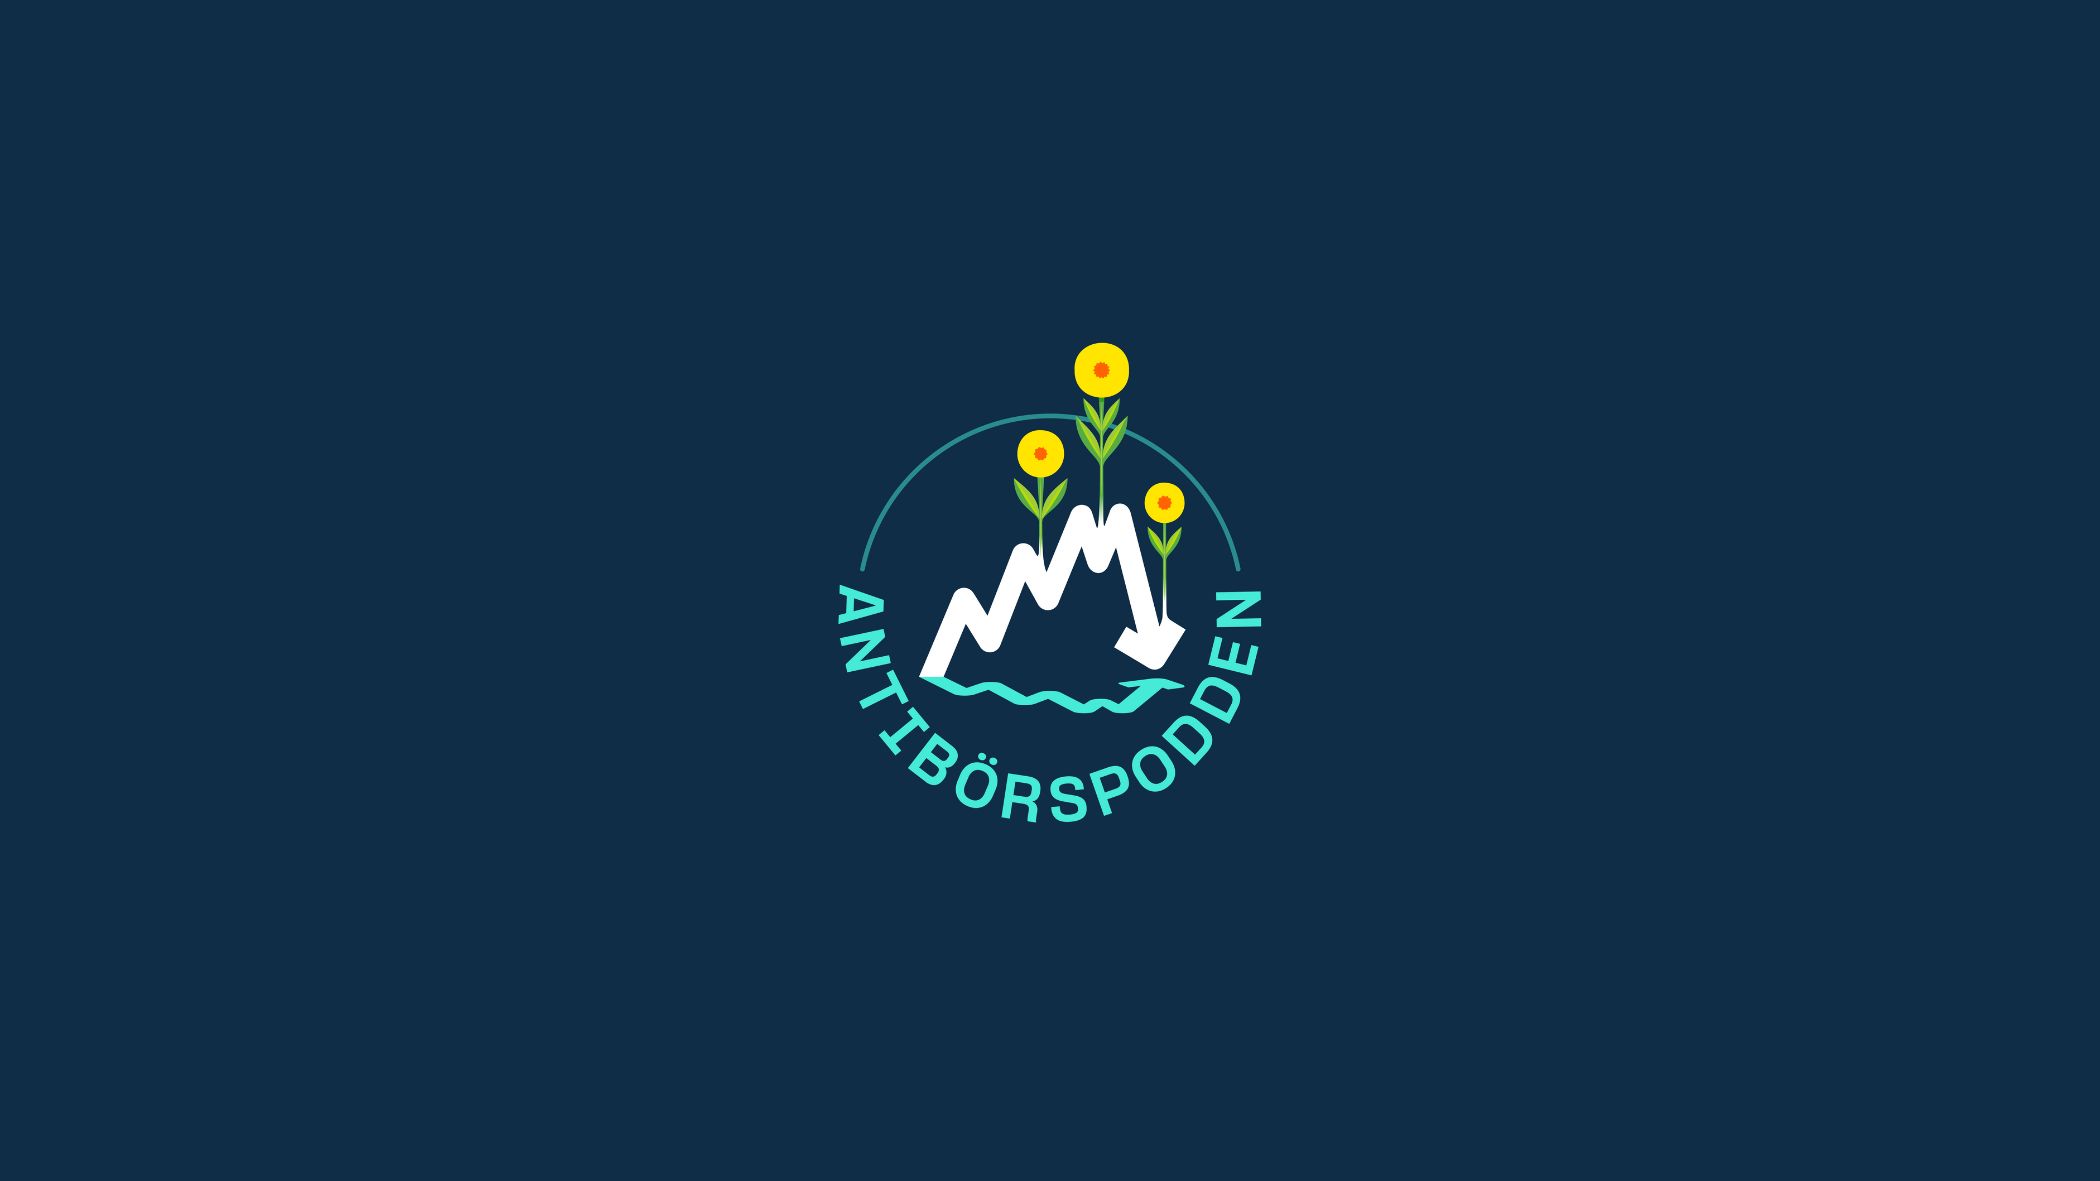 Antibörspodden – the new podcast on investing in venture capital, infrastructure and forestry